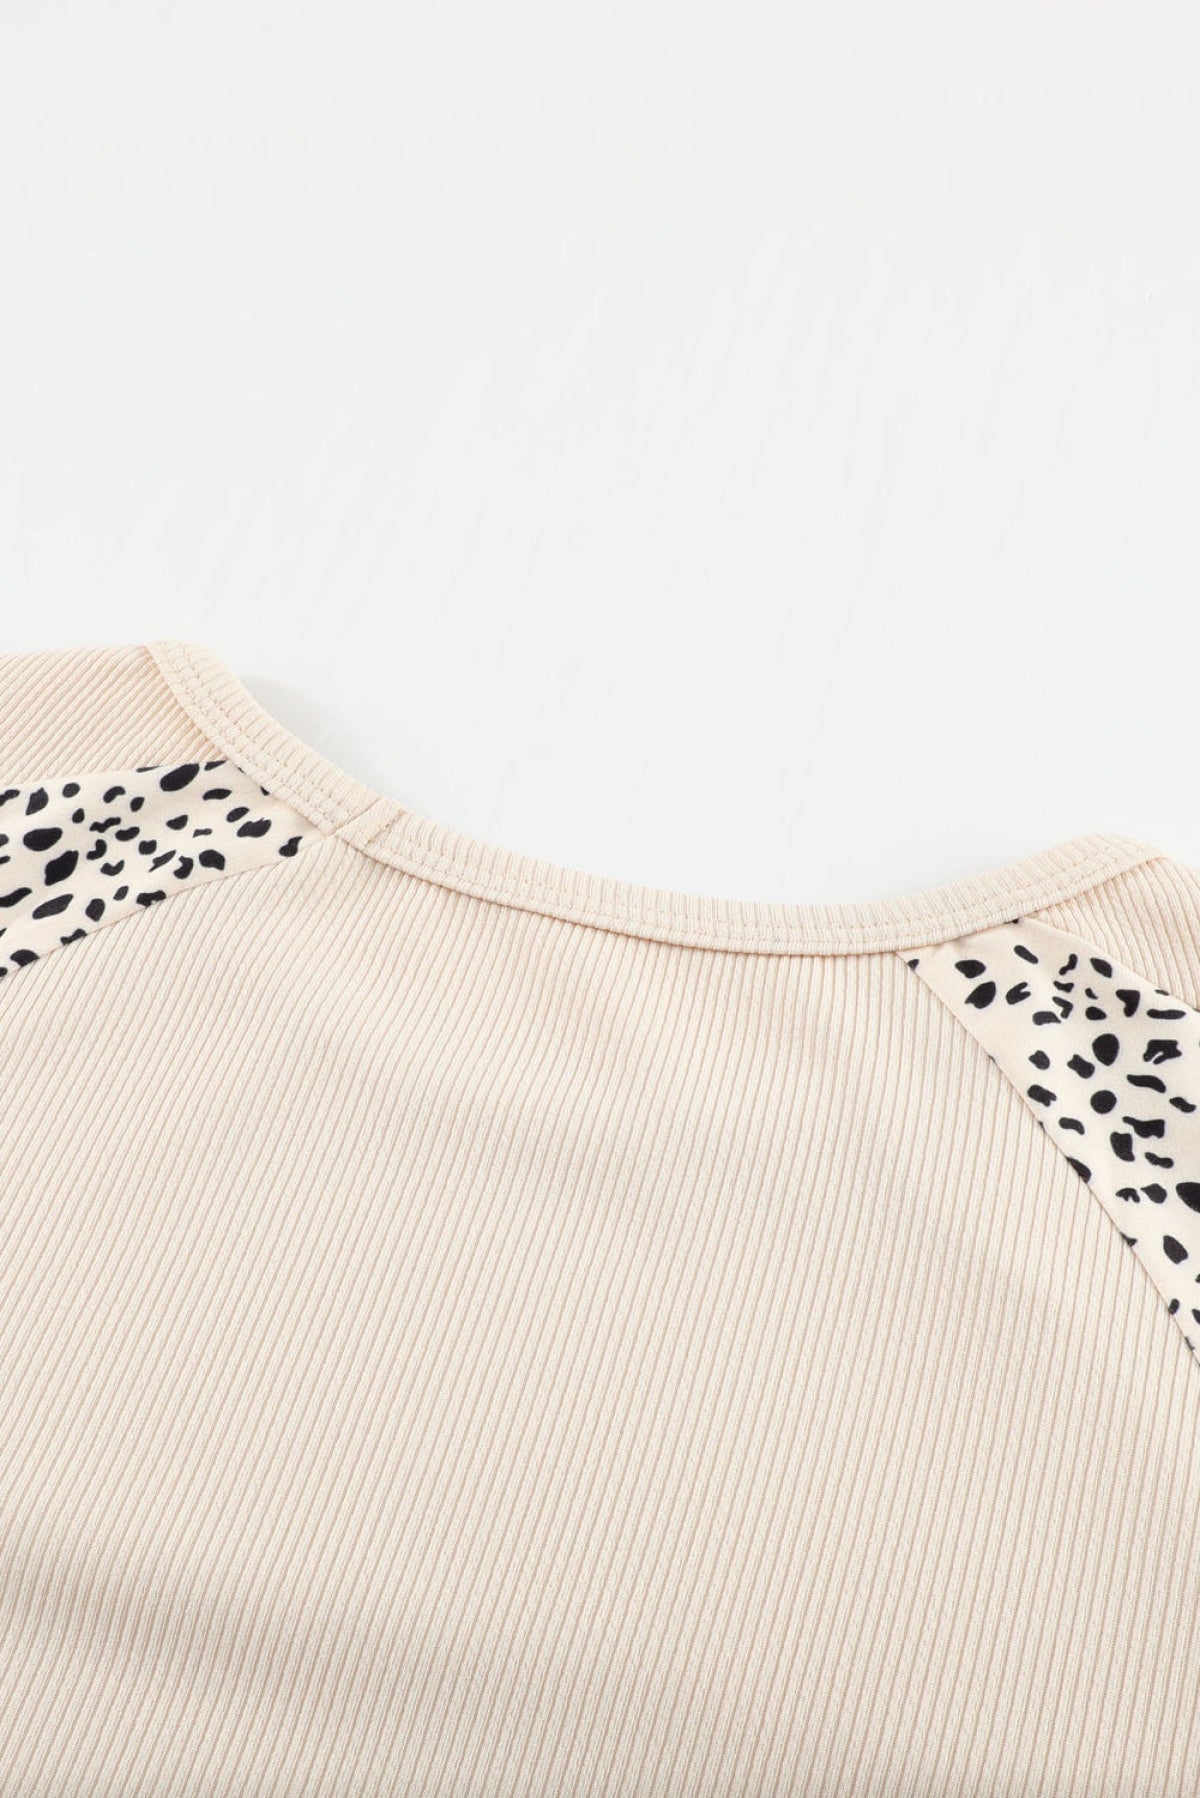 Leopard Print Long Sleeve Pullover Top